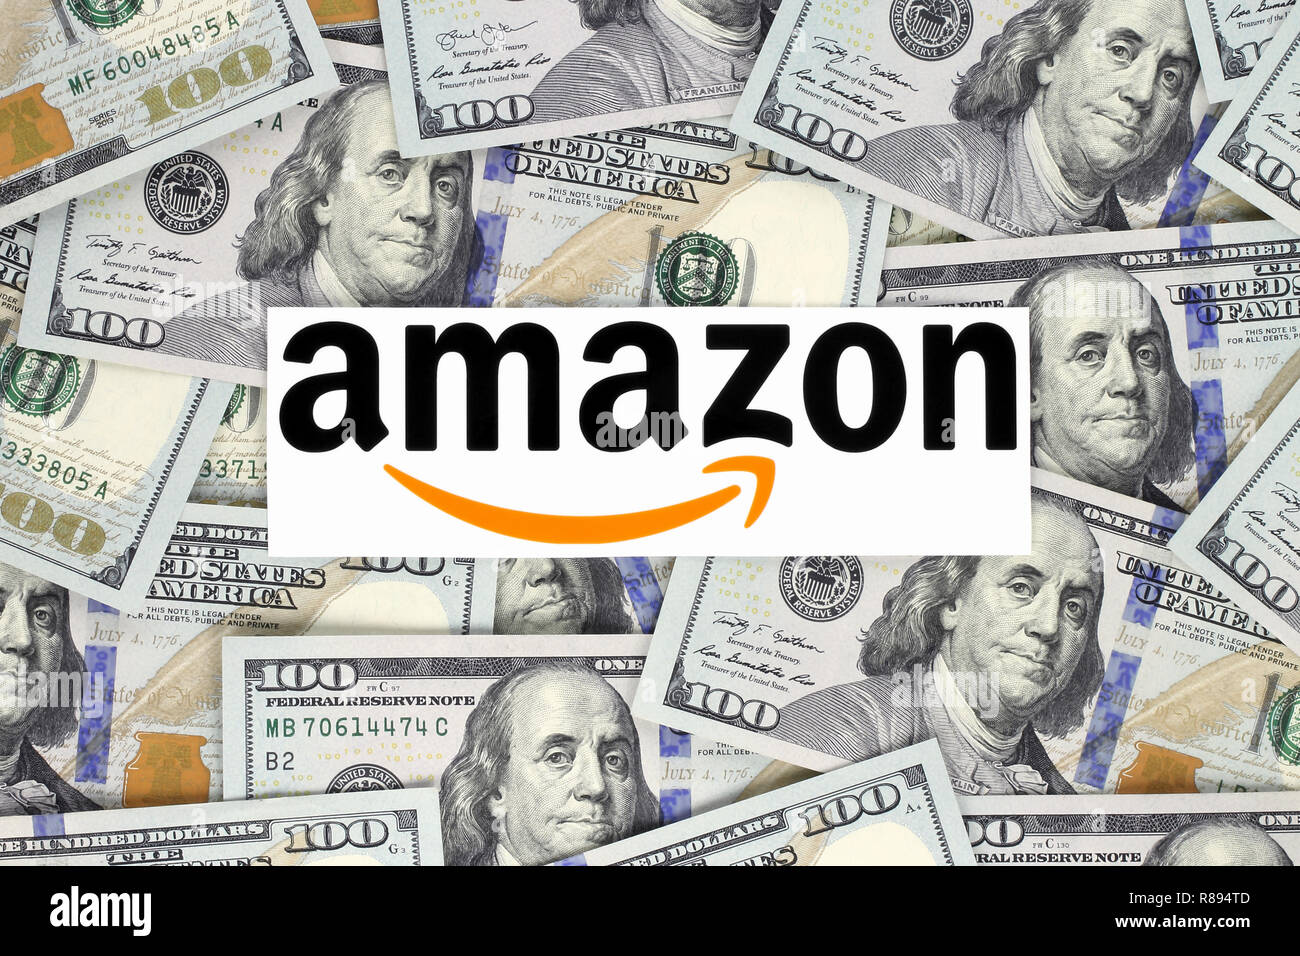 Kiev, Ukraine - September 07, 2018: Amazon logo printed on paper, cut and placed on money background.Amazon is an American electronic commerce company Stock Photo